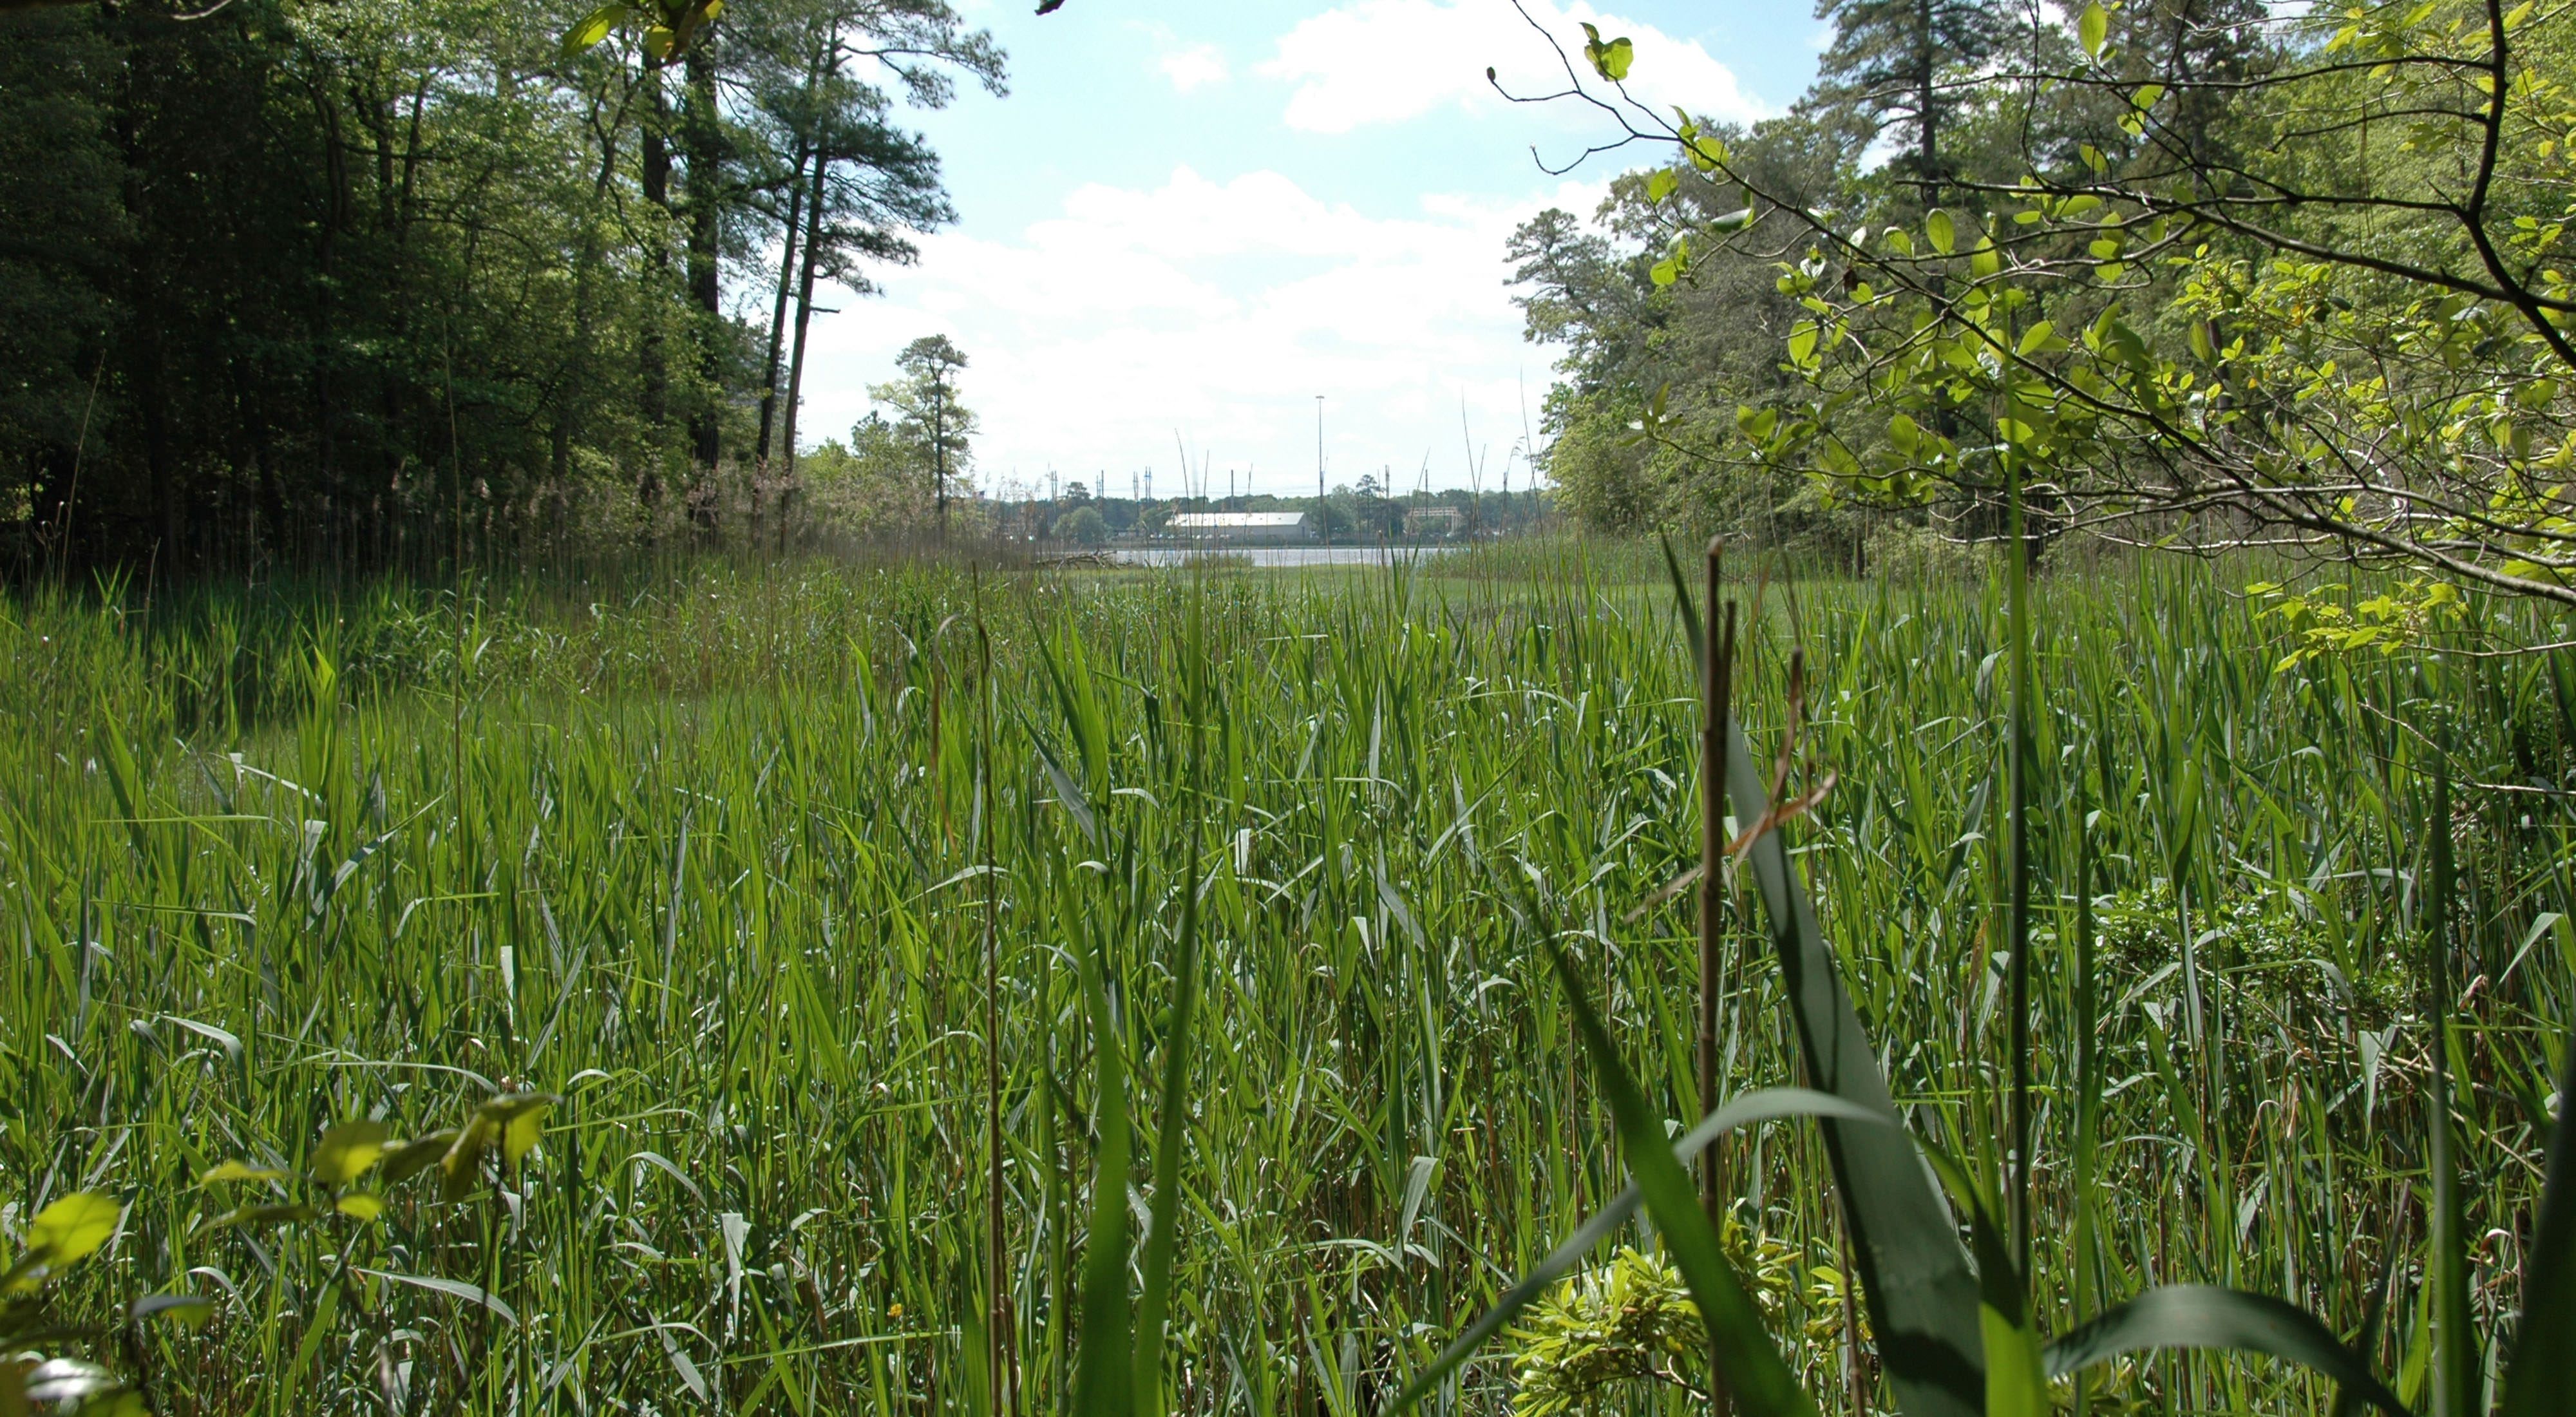 Tall green marsh grass dominates the foreground, extending into the distance before ending at a narrow river. Low farm buildings are visible on the opposite shore.